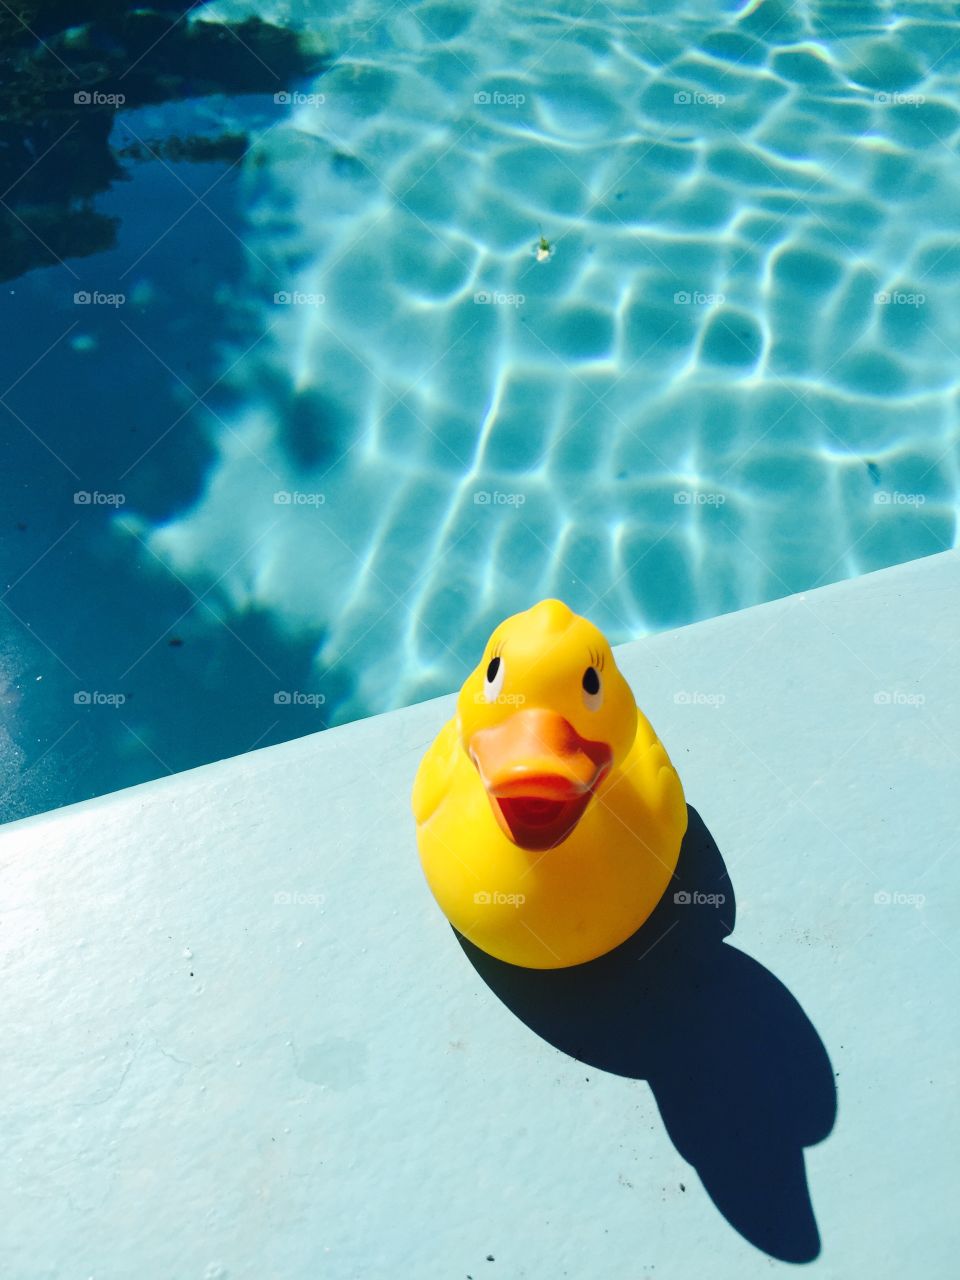 Rubber duckie goes into the swimming pool. Rubber duck loves the swimming pool on a hot summer day